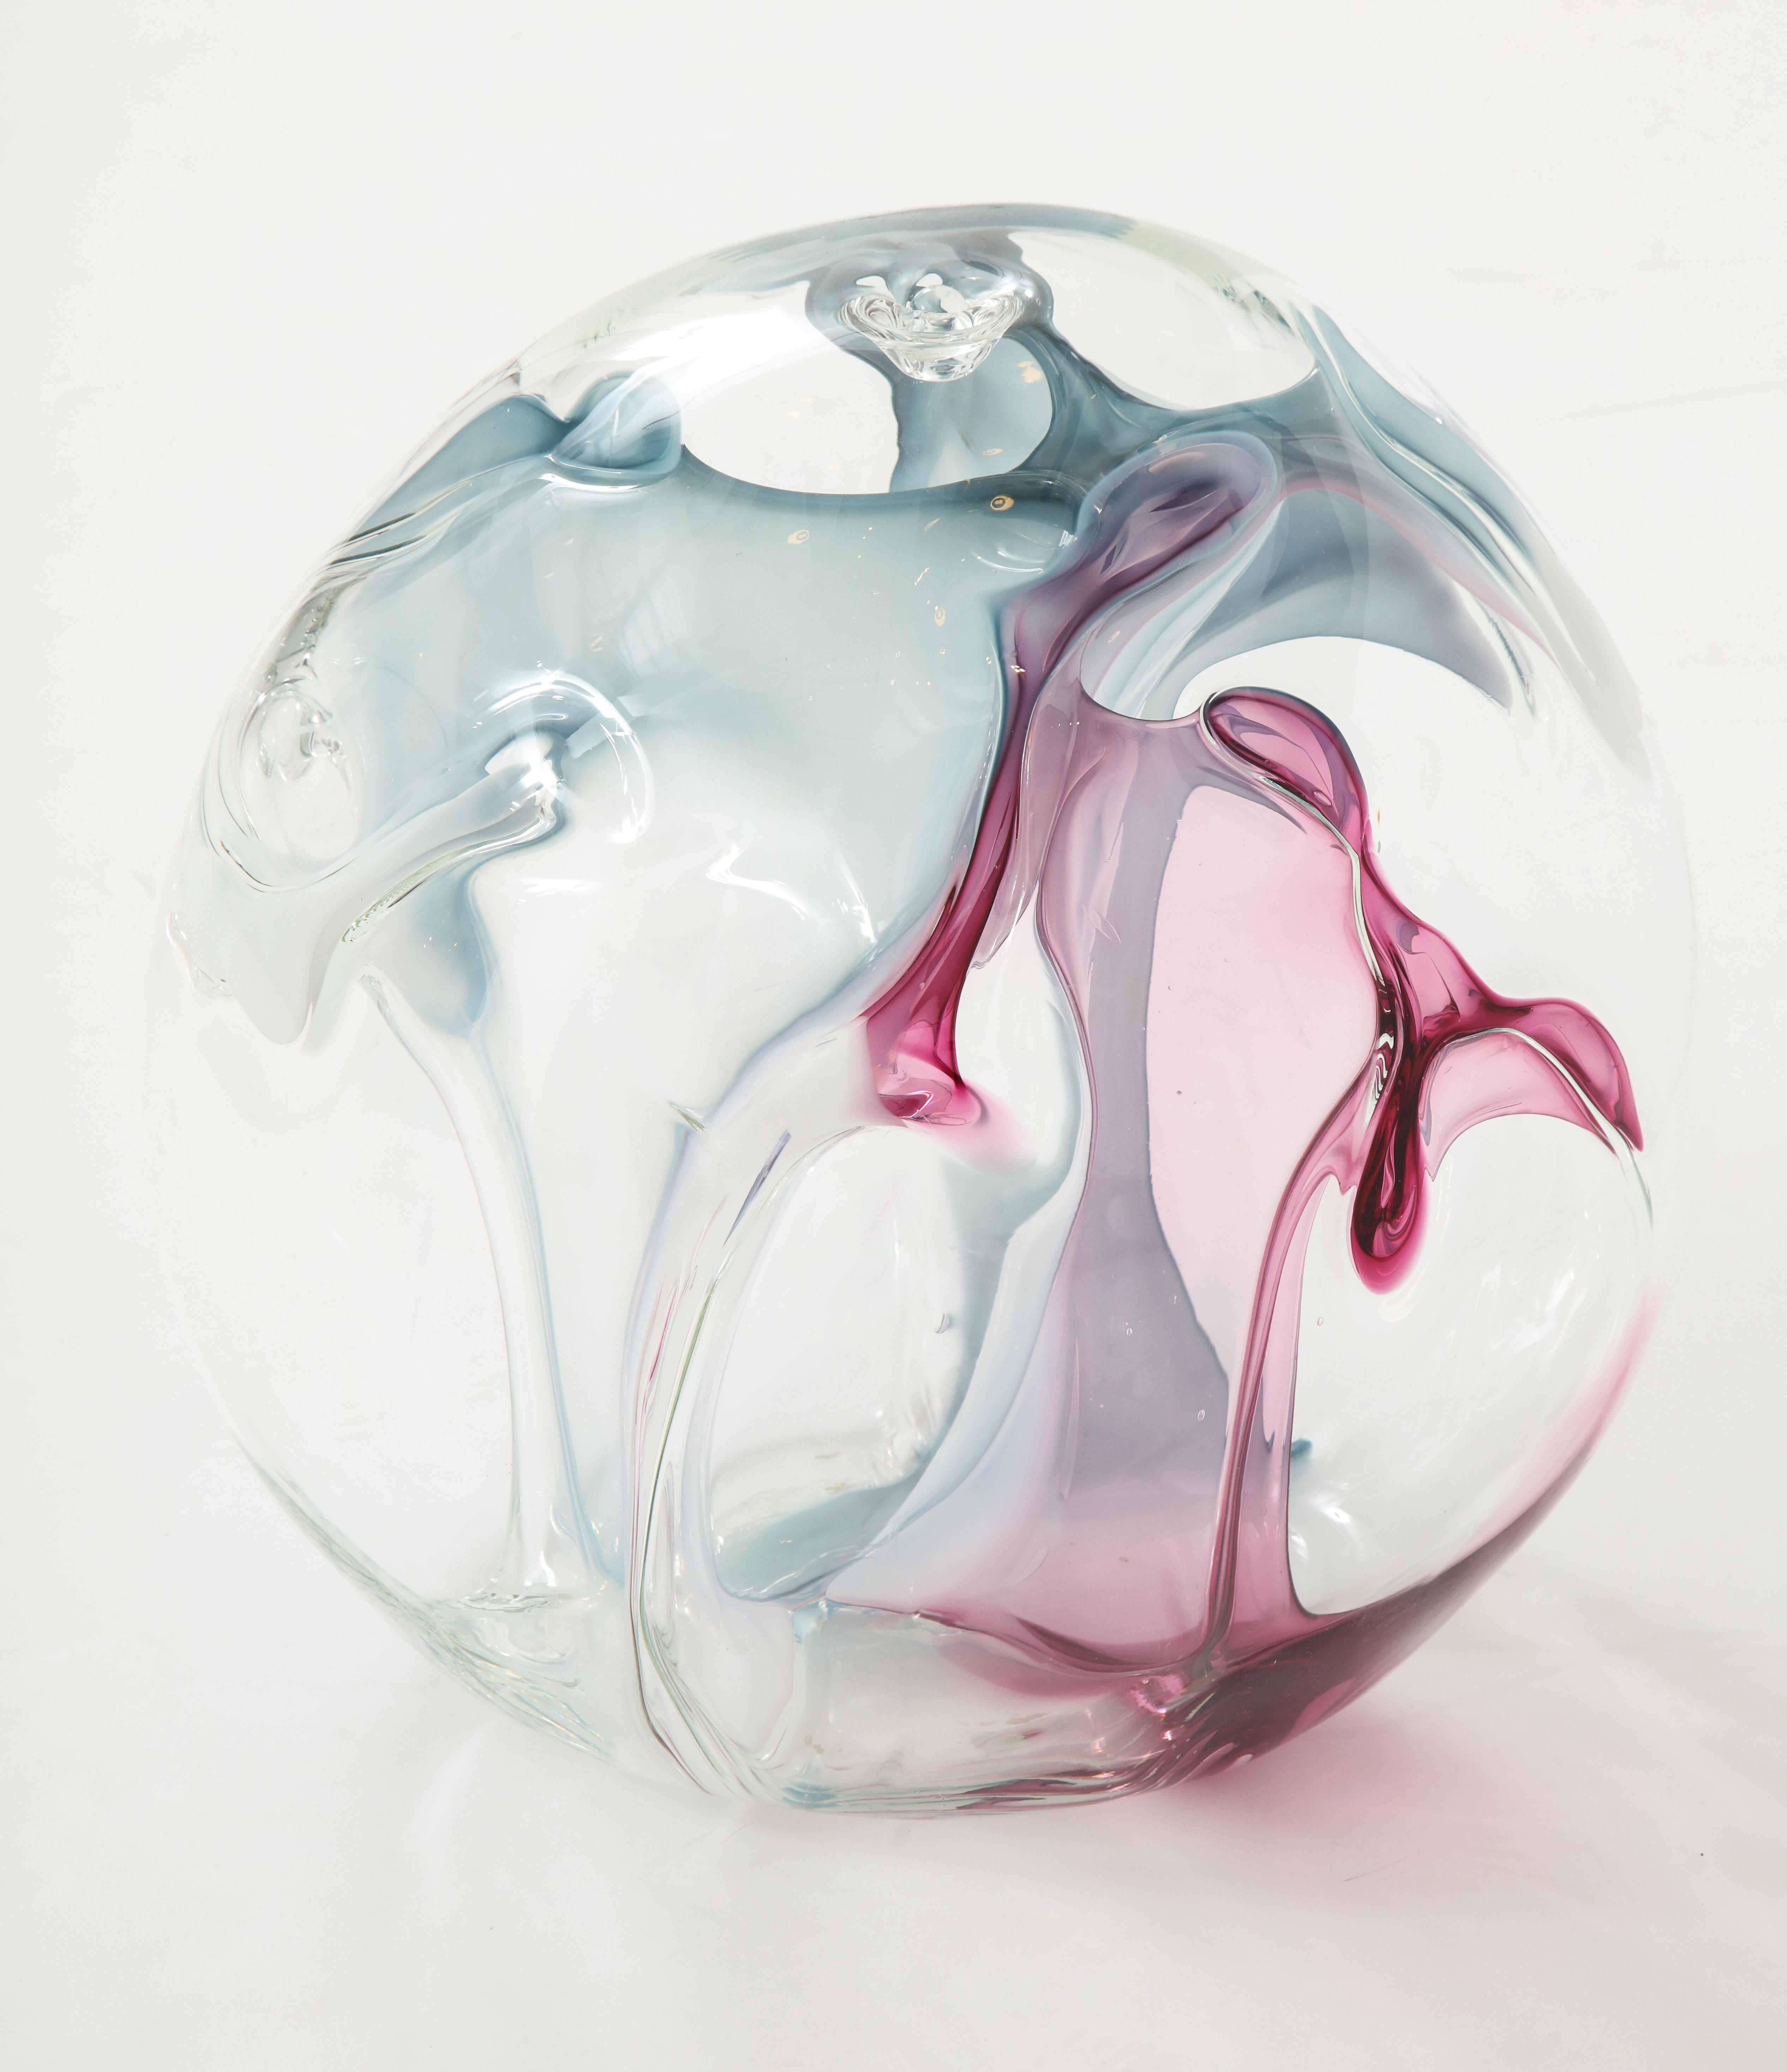 Unusually large glass sculpture by Peter Bramhall.
Hand blown glass sculpture with internal threads of magenta, rose and
ice blue.